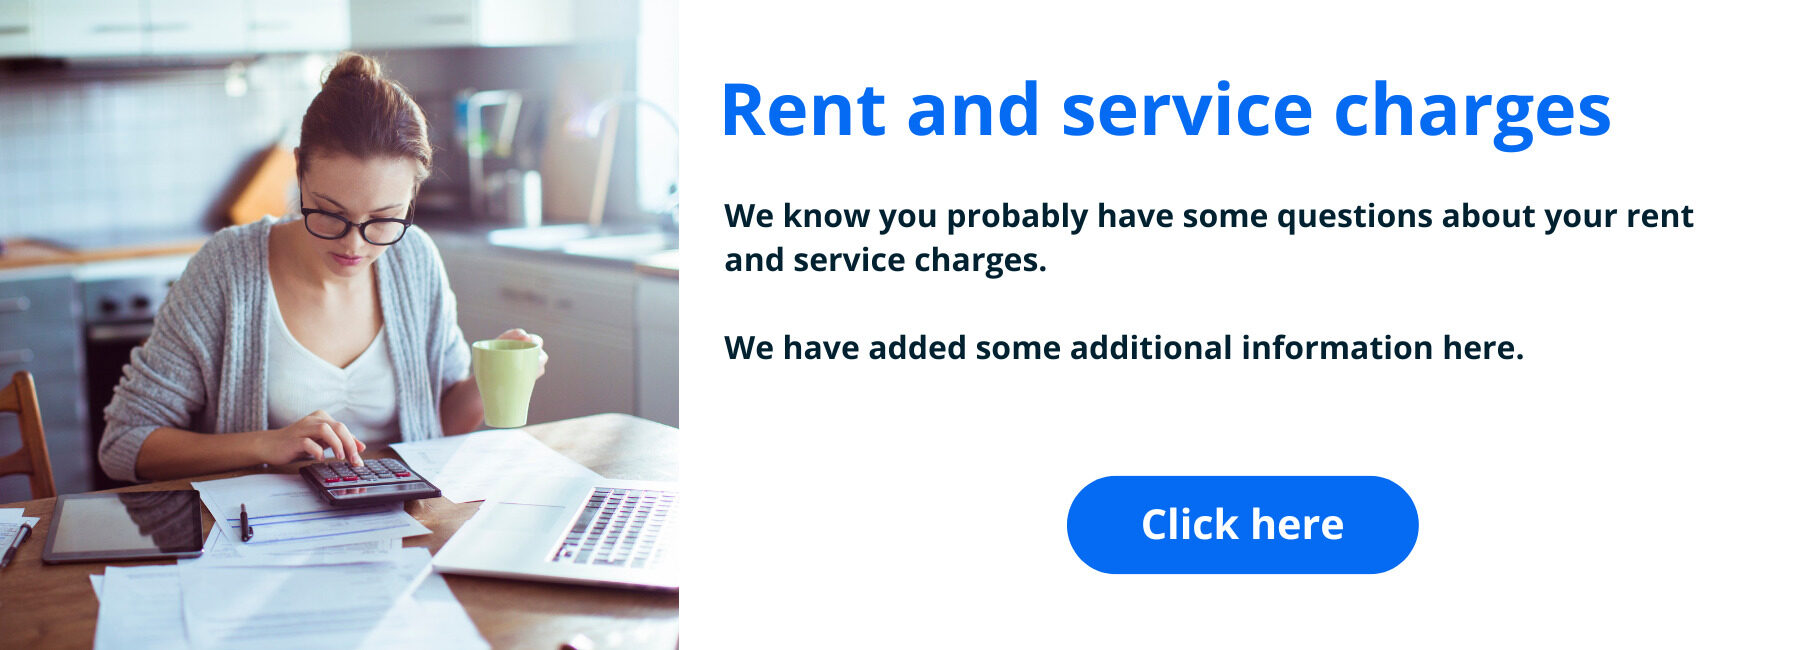 https://www.havebury.com/payments-rent-and-service-charges/rents-and-service-charges-explained/